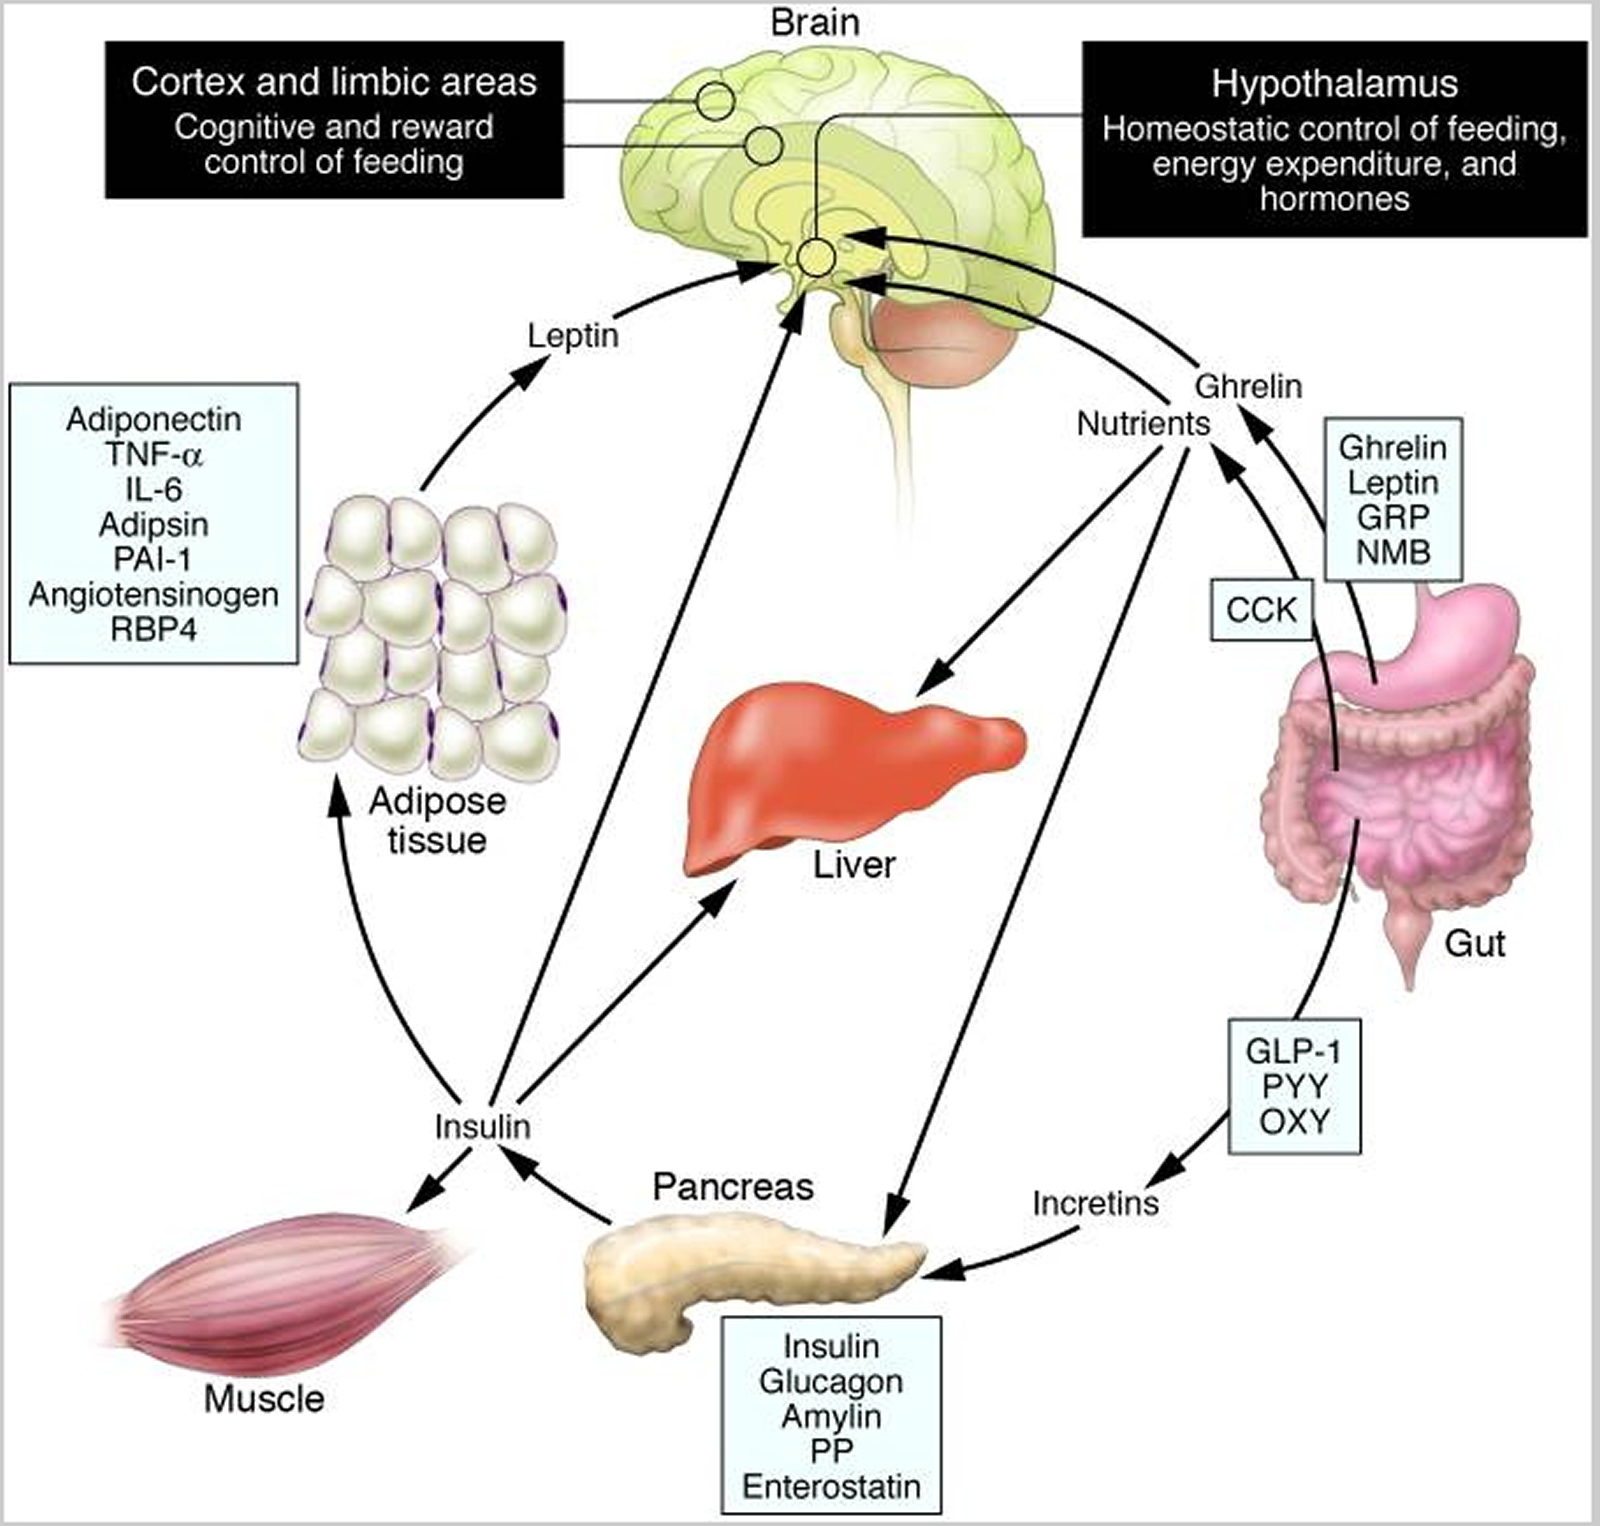 ghrelin and leptin function